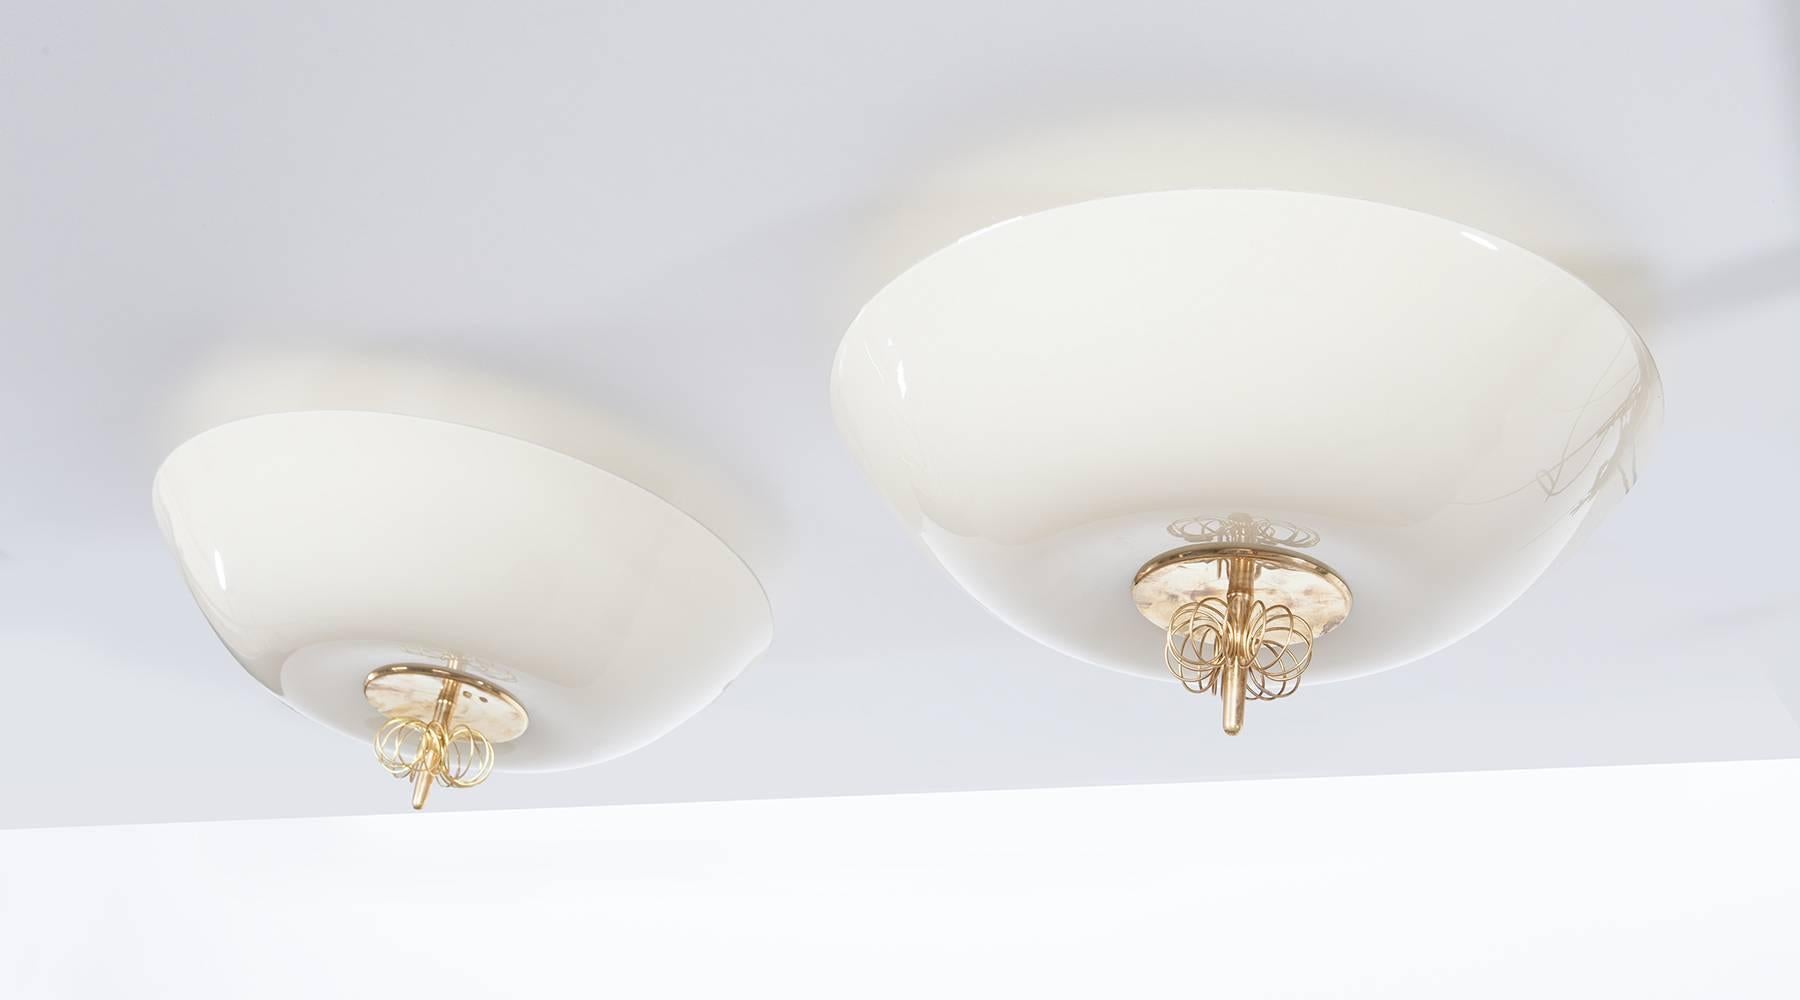 Polished Pair of Paavo Tynell Ceiling Lamps